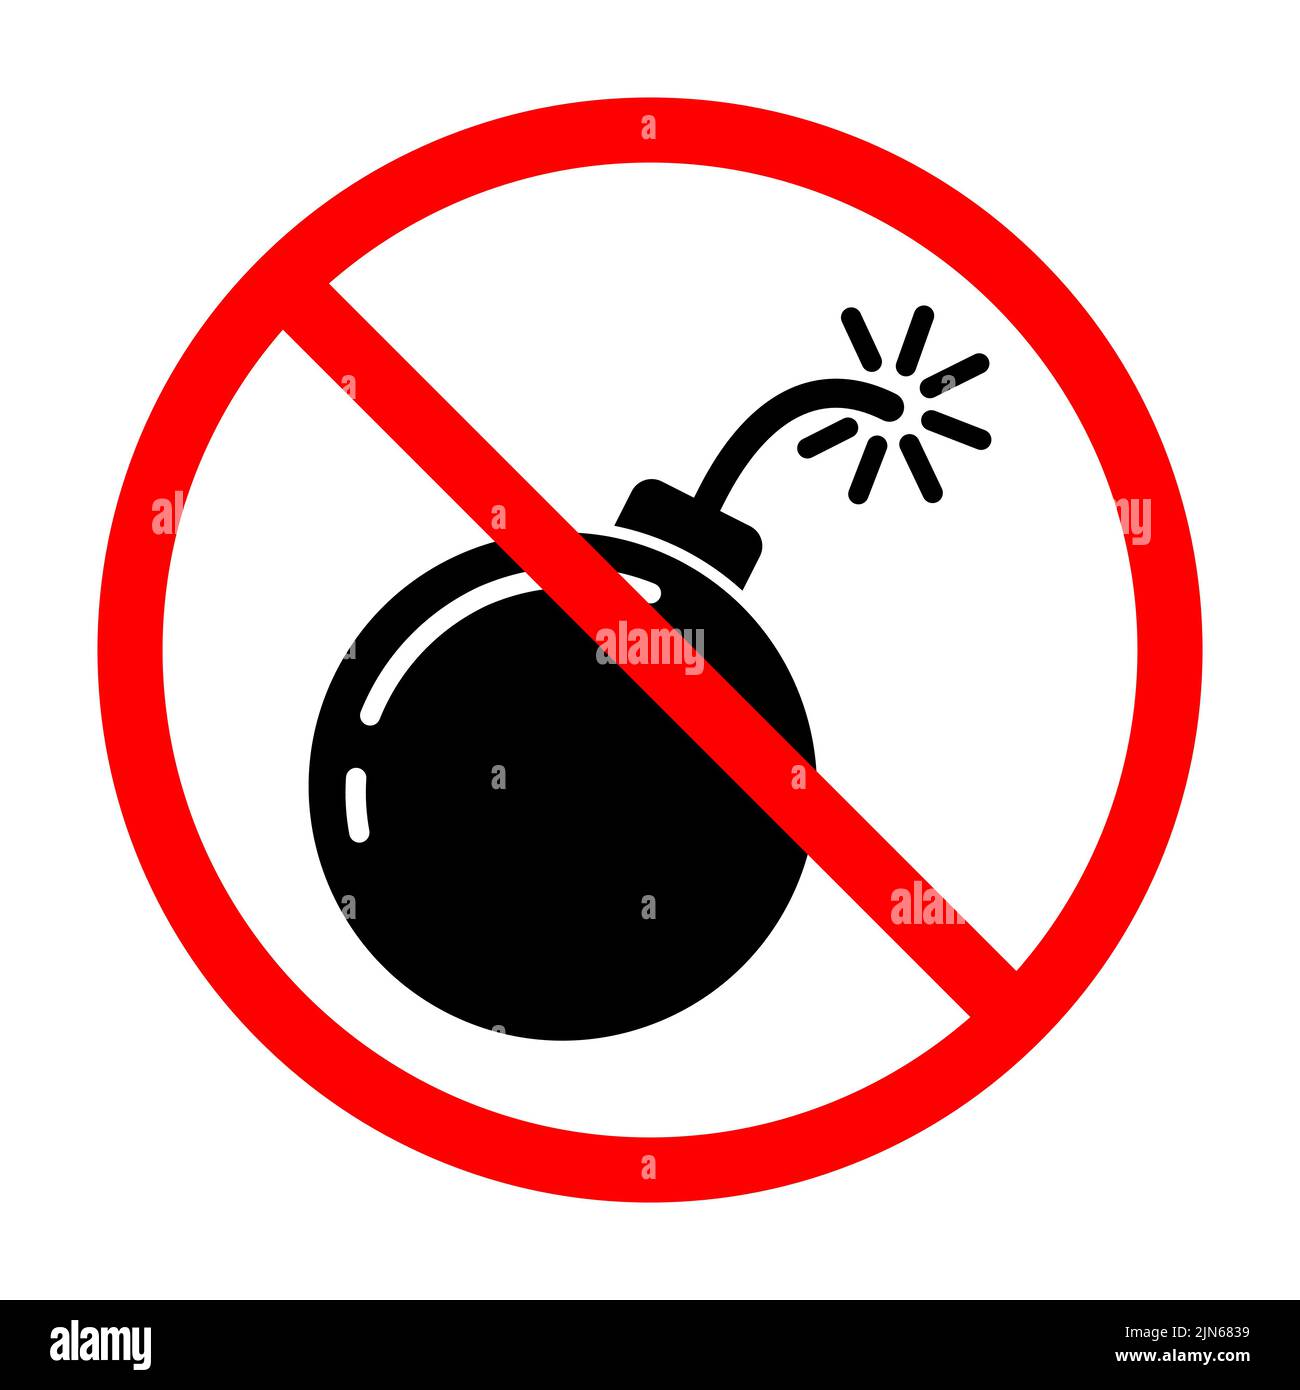 Exploding bombs prohibition sign. Bombs ban sign. No explosion sign. Vector illustration. Stock Vector